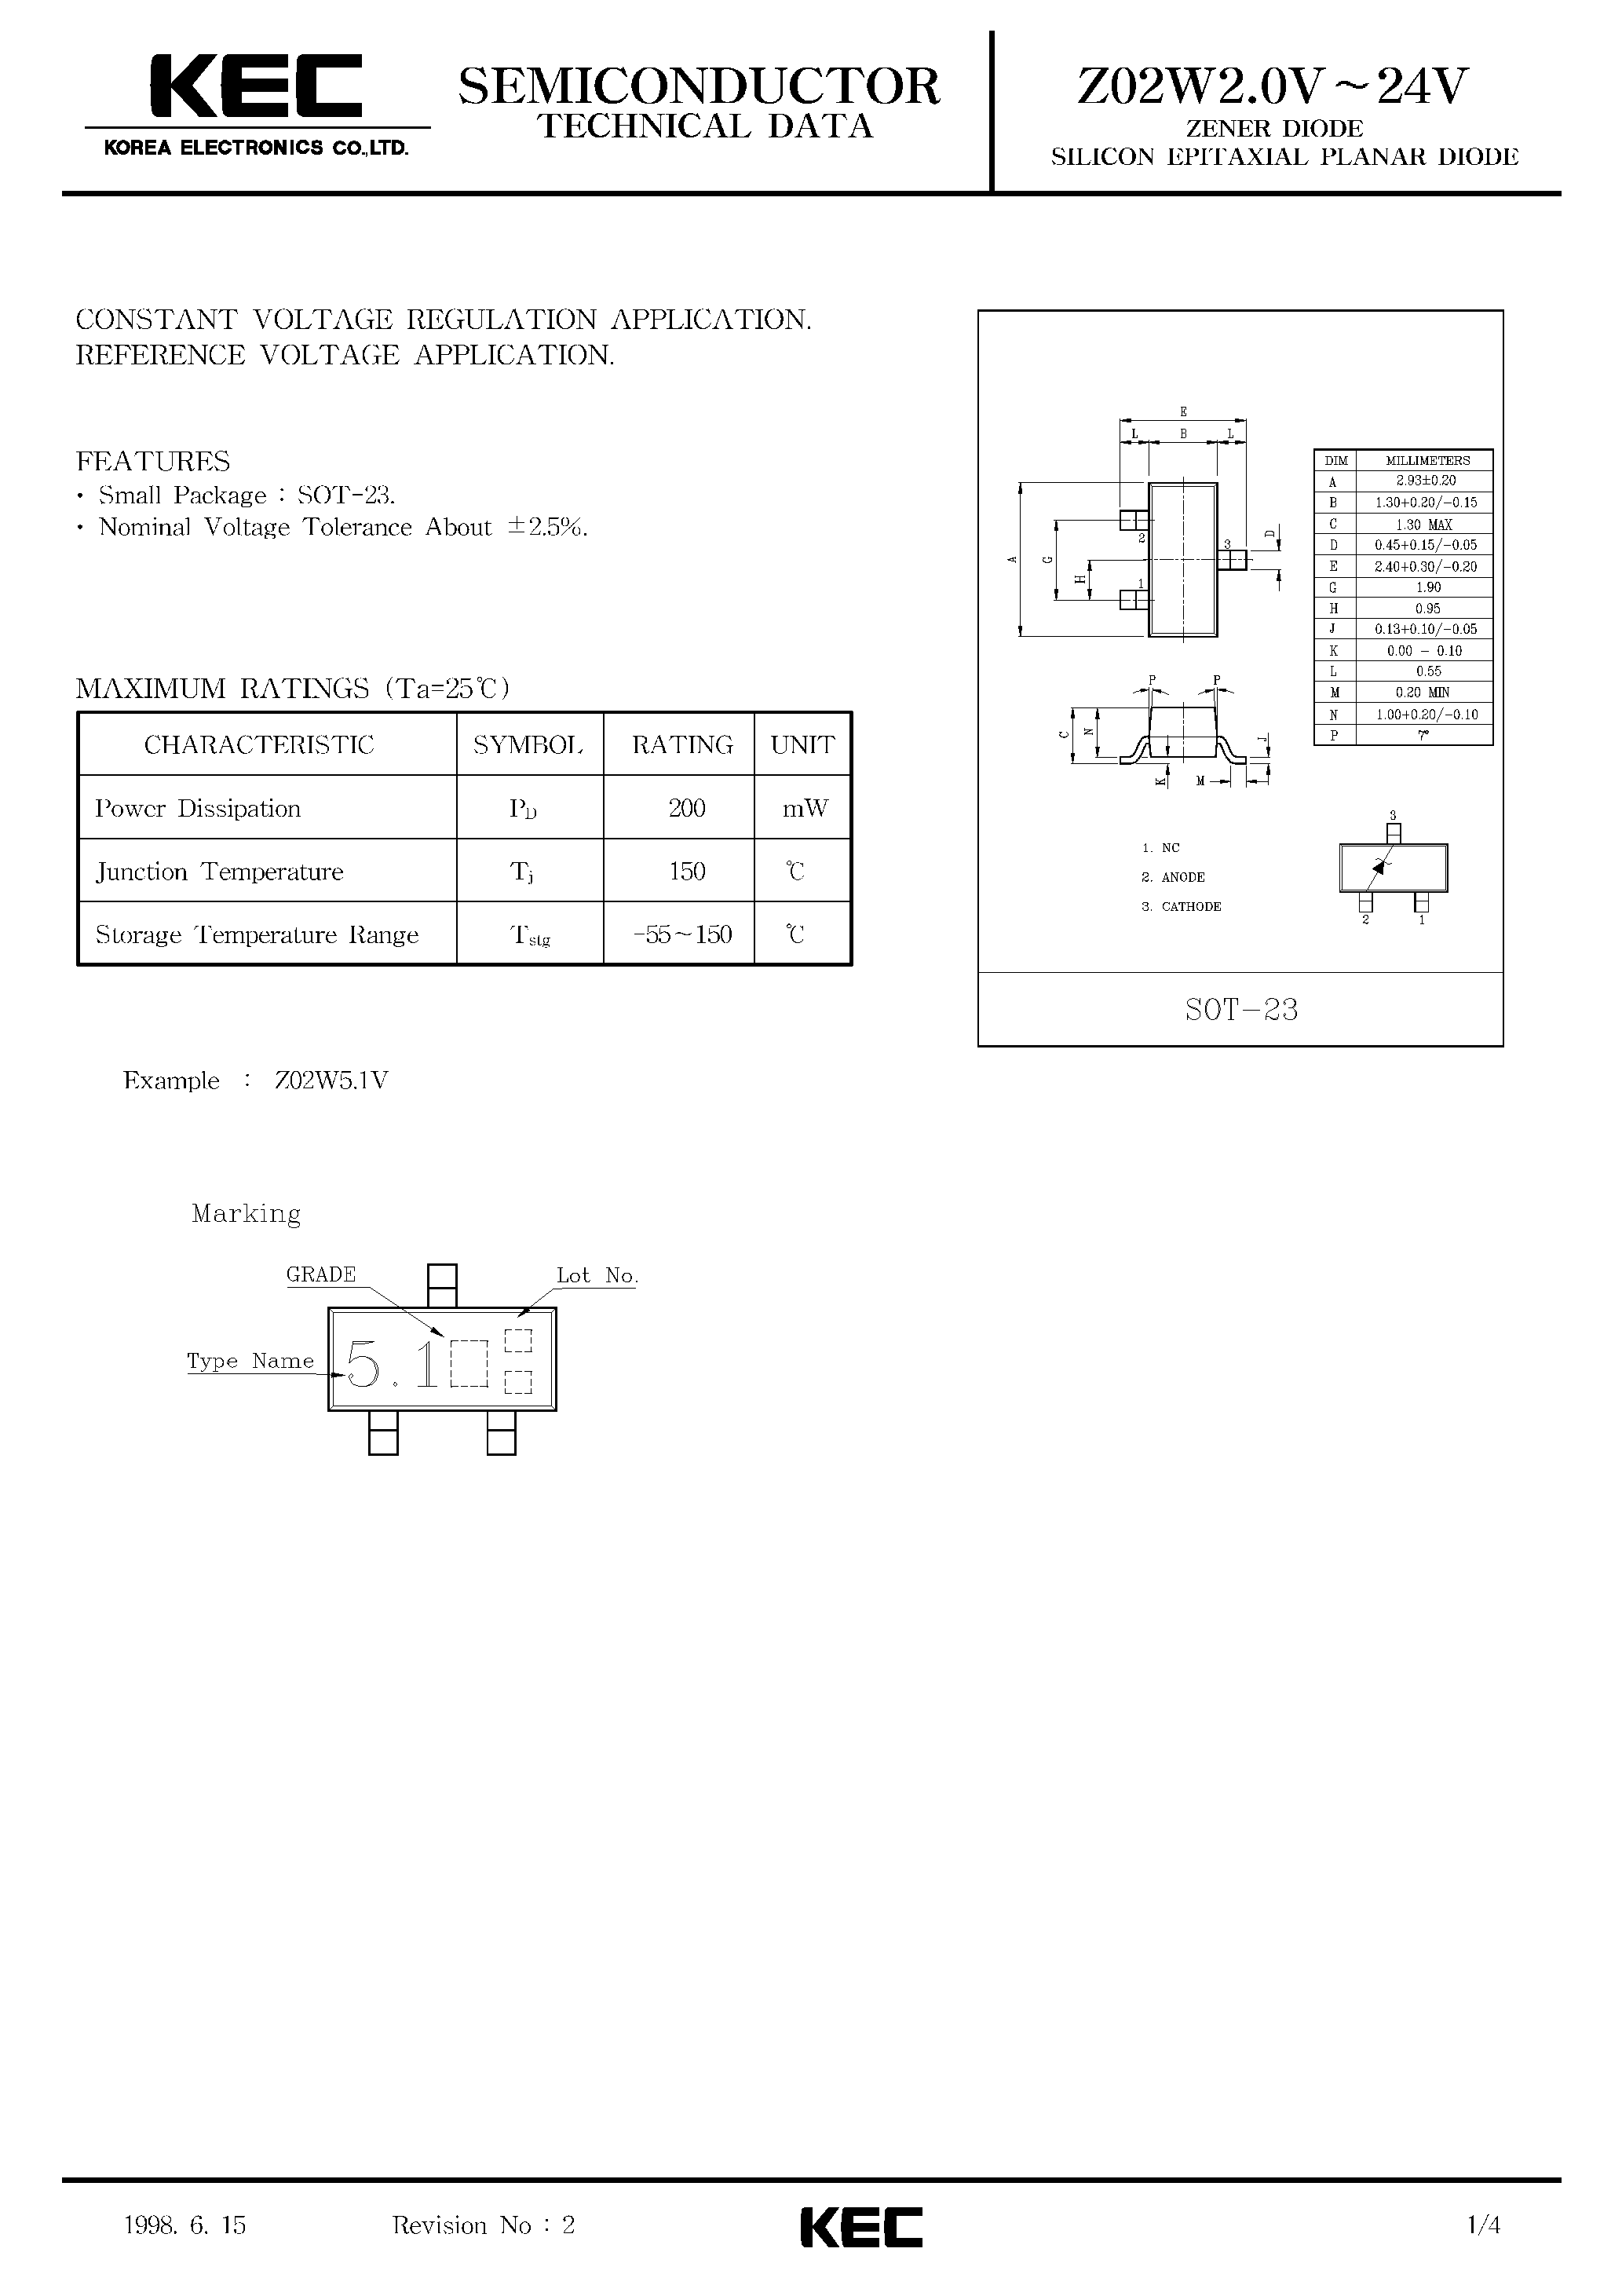 Datasheet Z02W16V - ZENER DIODE SILICON EPITAXIAL PLANAR DIODE page 1